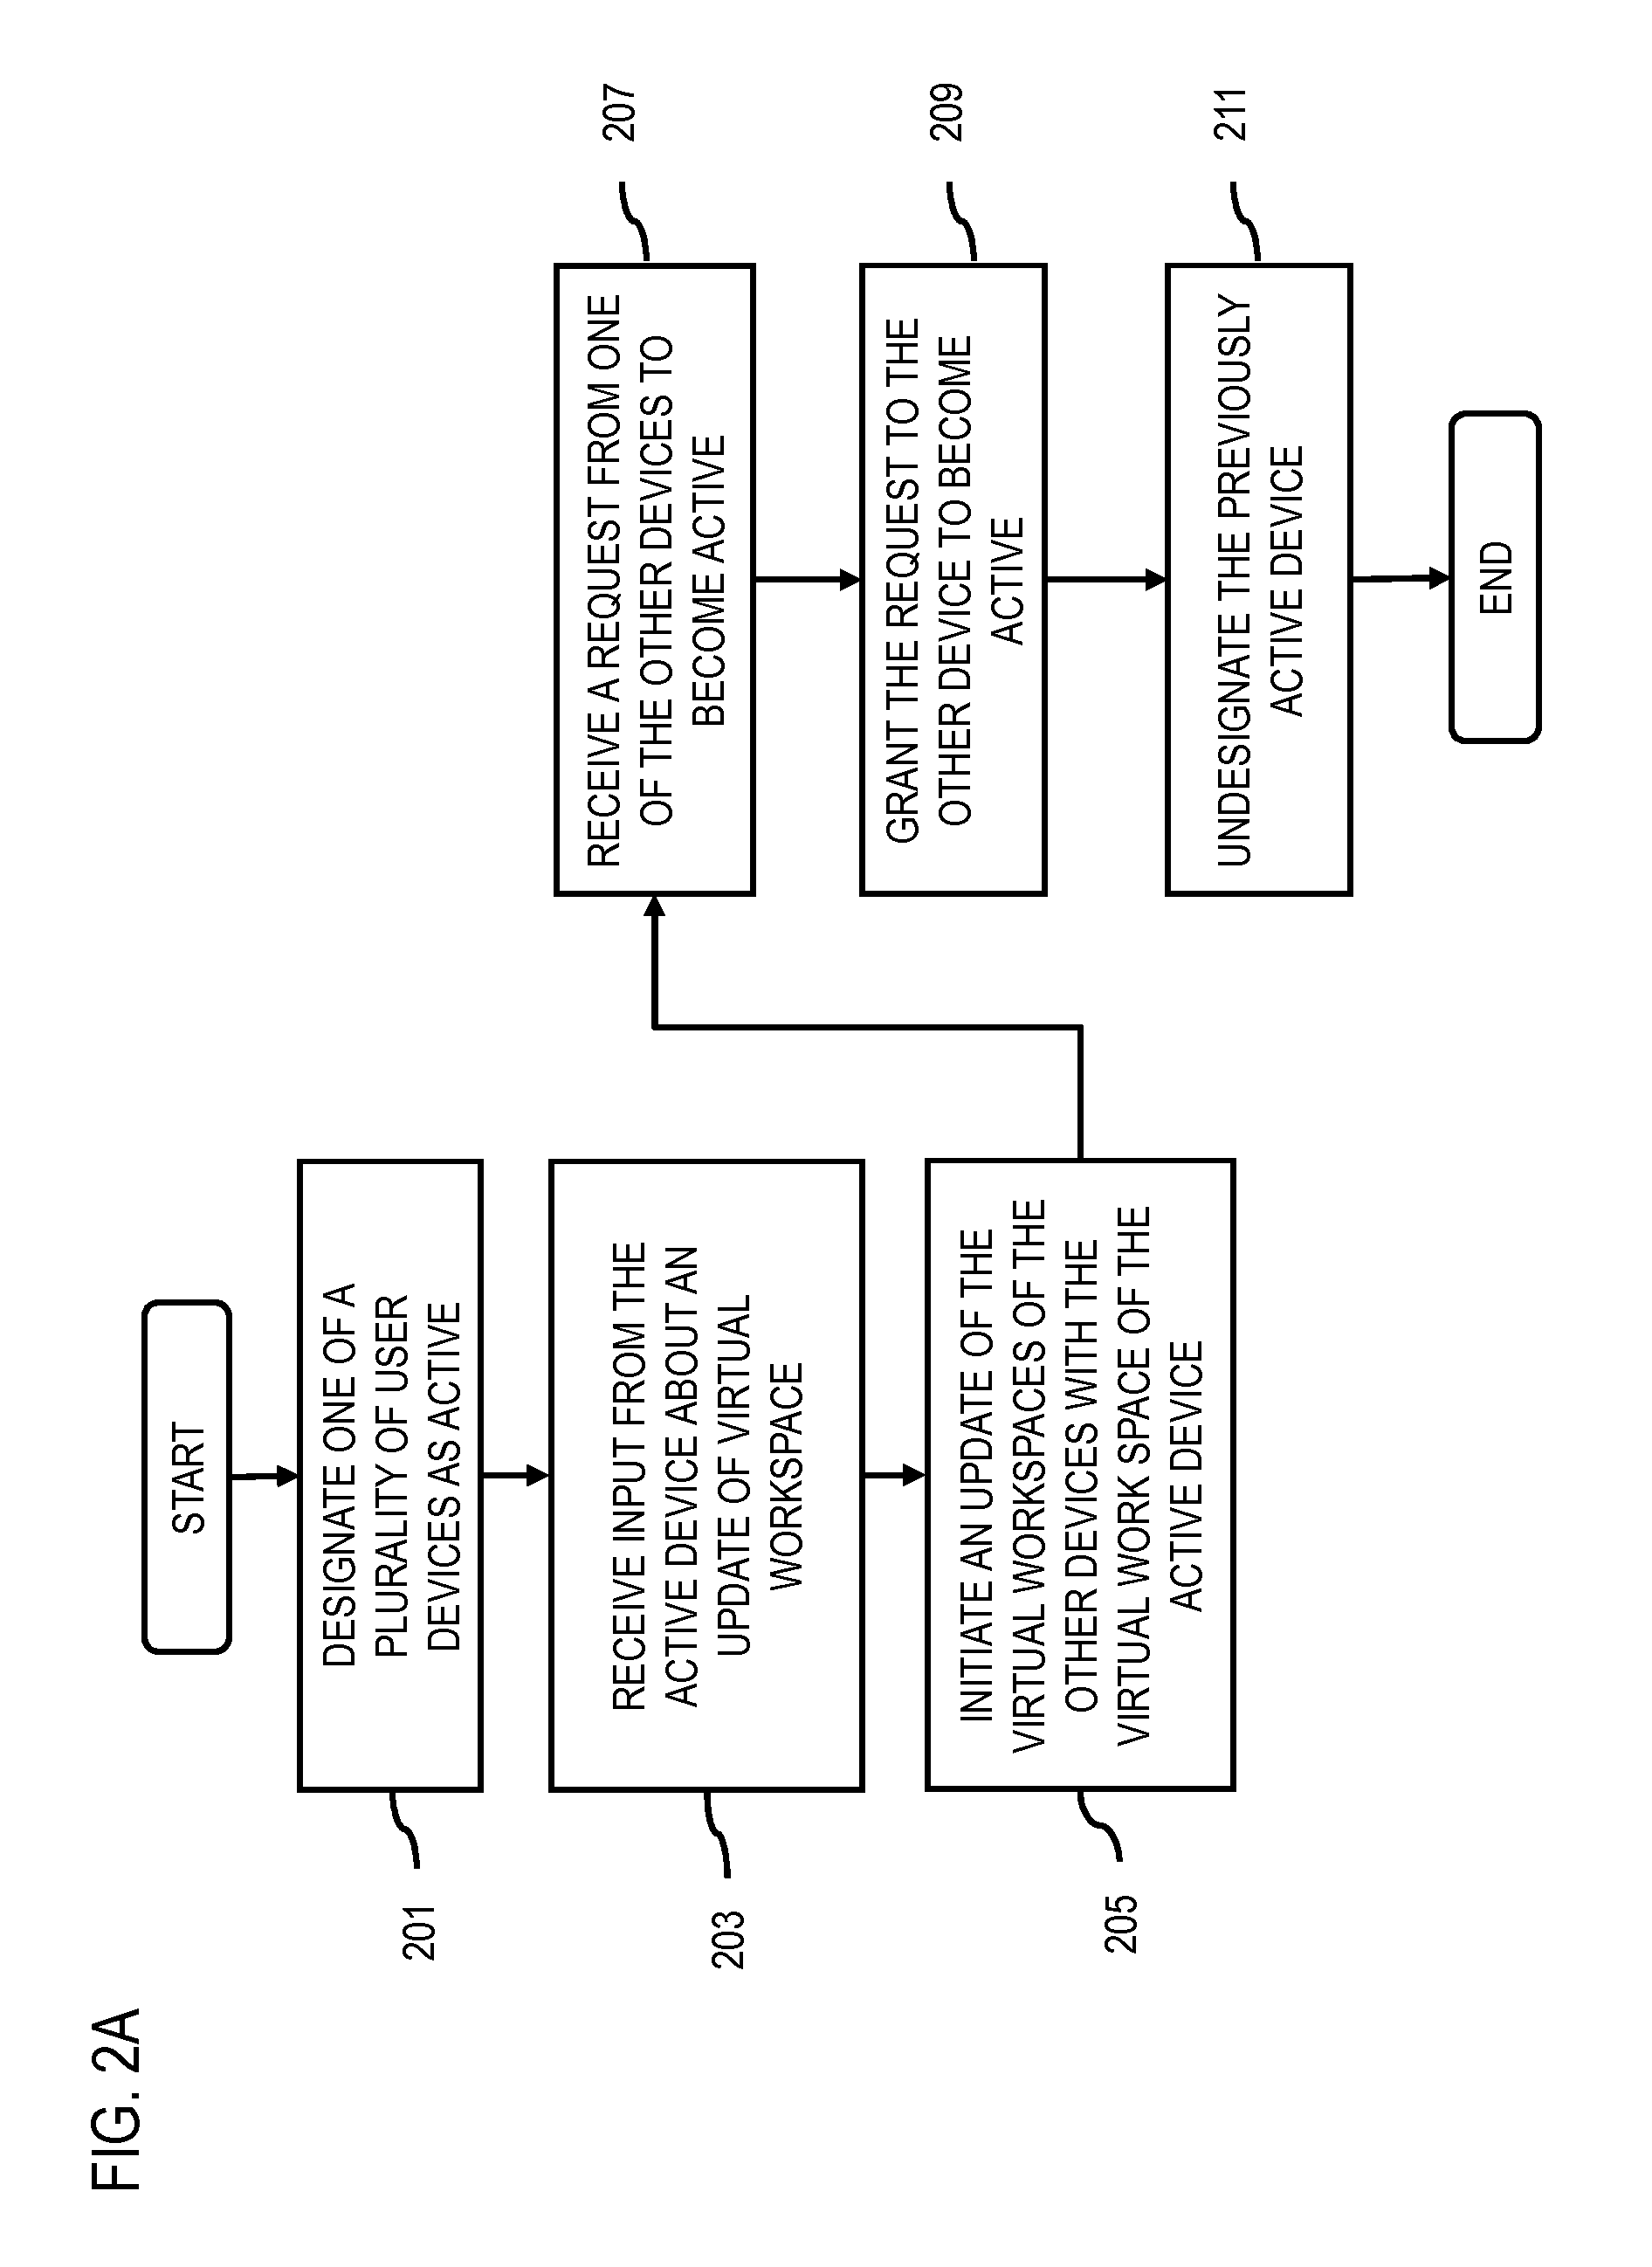 Method and apparatus for sharing virtual workspaces